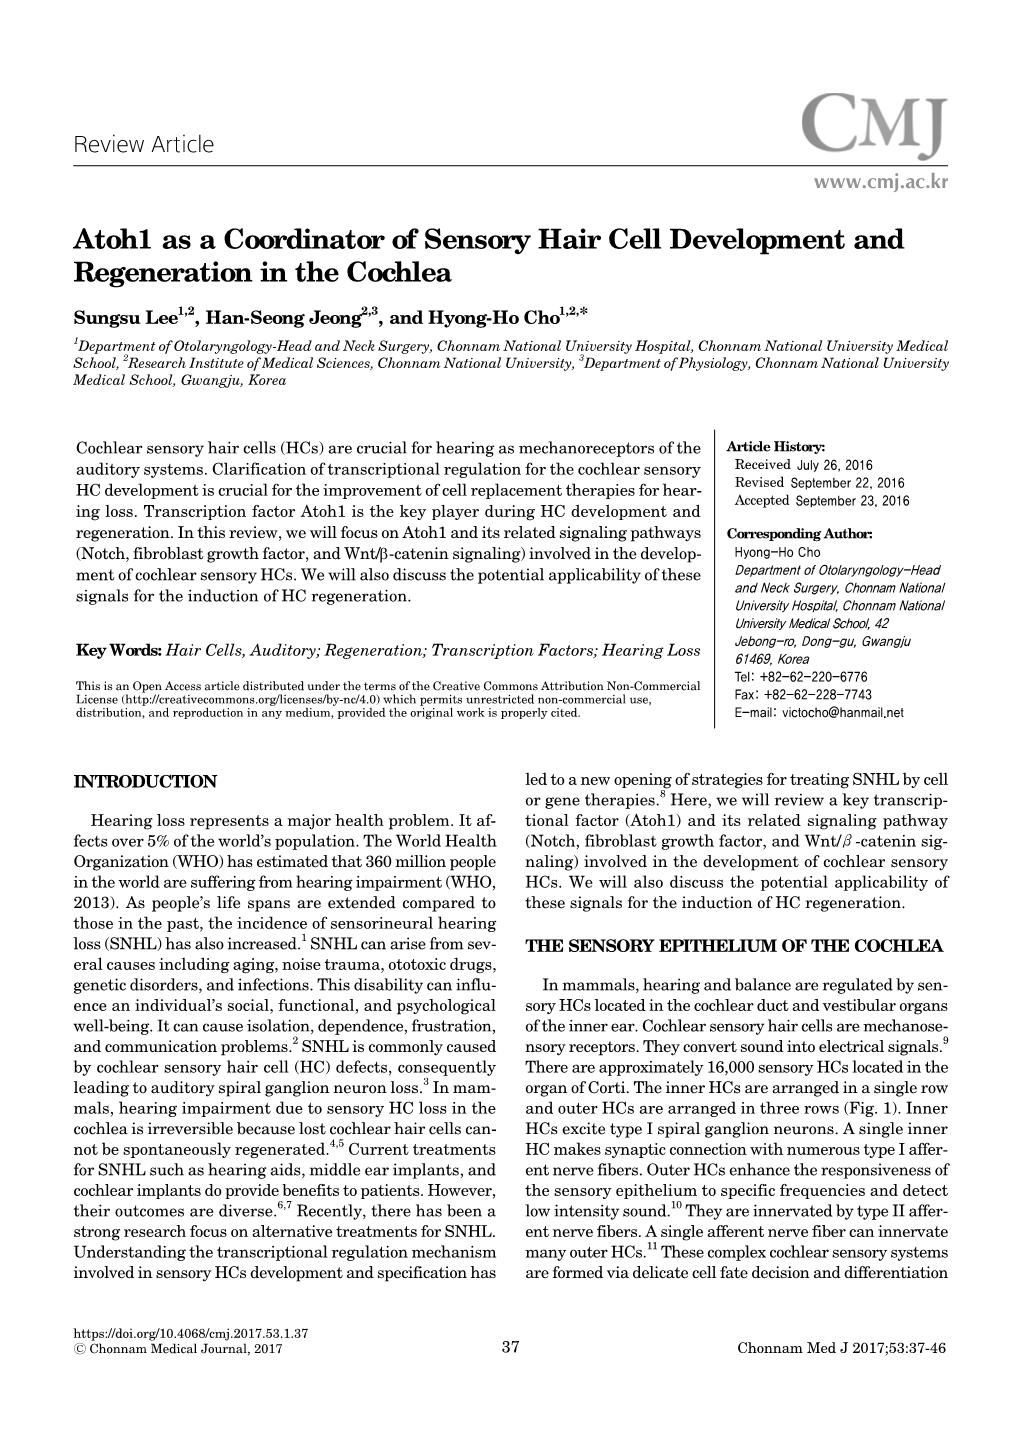 Atoh1 As a Coordinator of Sensory Hair Cell Development and Regeneration in the Cochlea